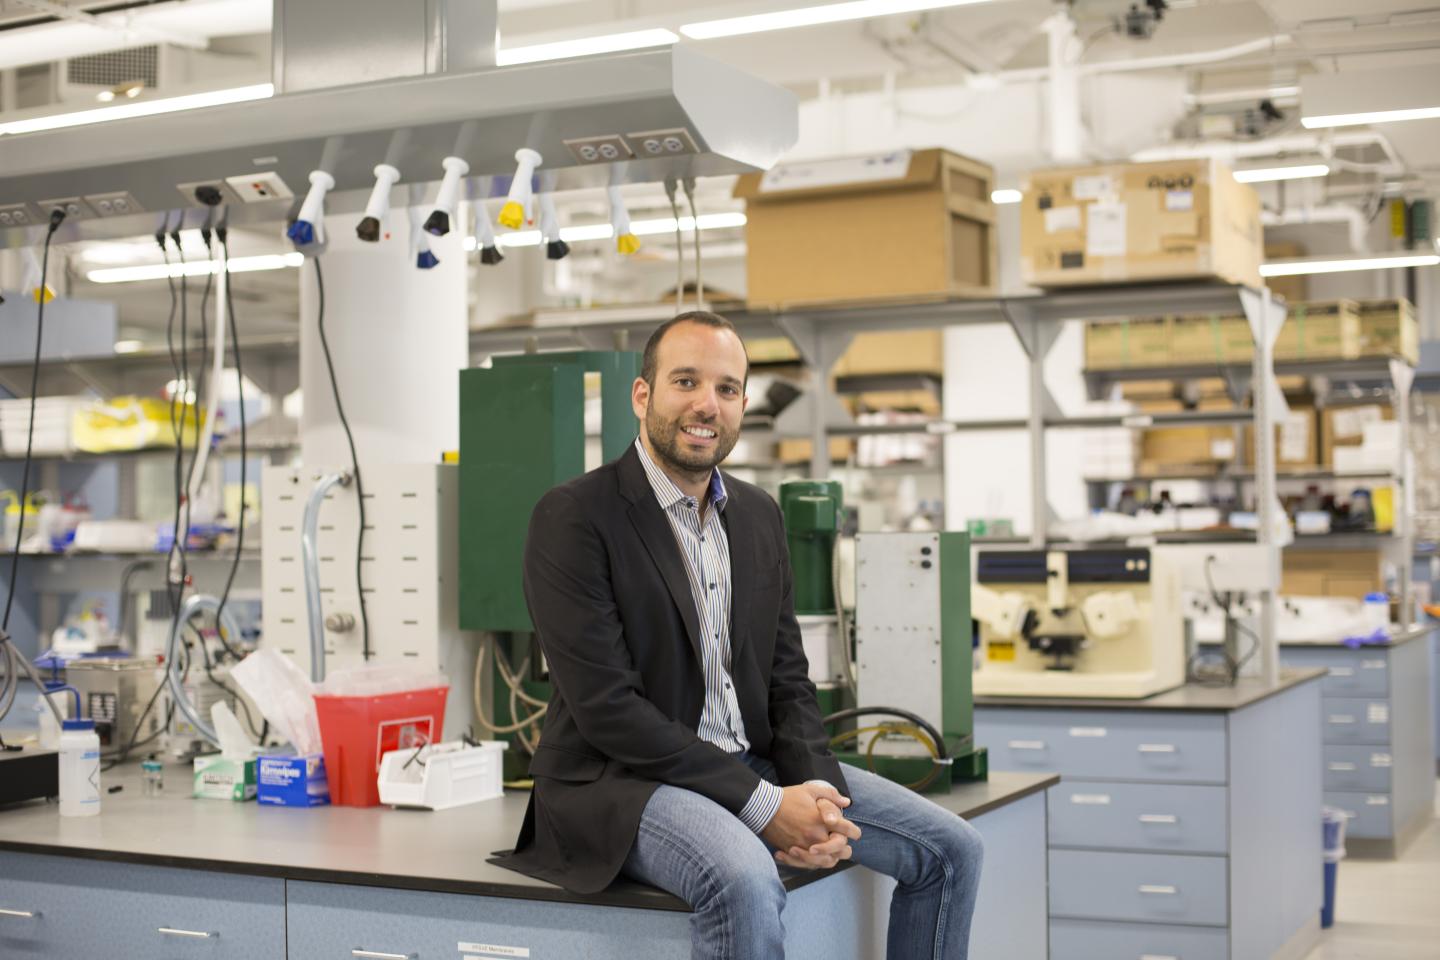 Miguel Modestino, Assistant Professor of Chemical and Biomolecular Engineering at NYU Tandon